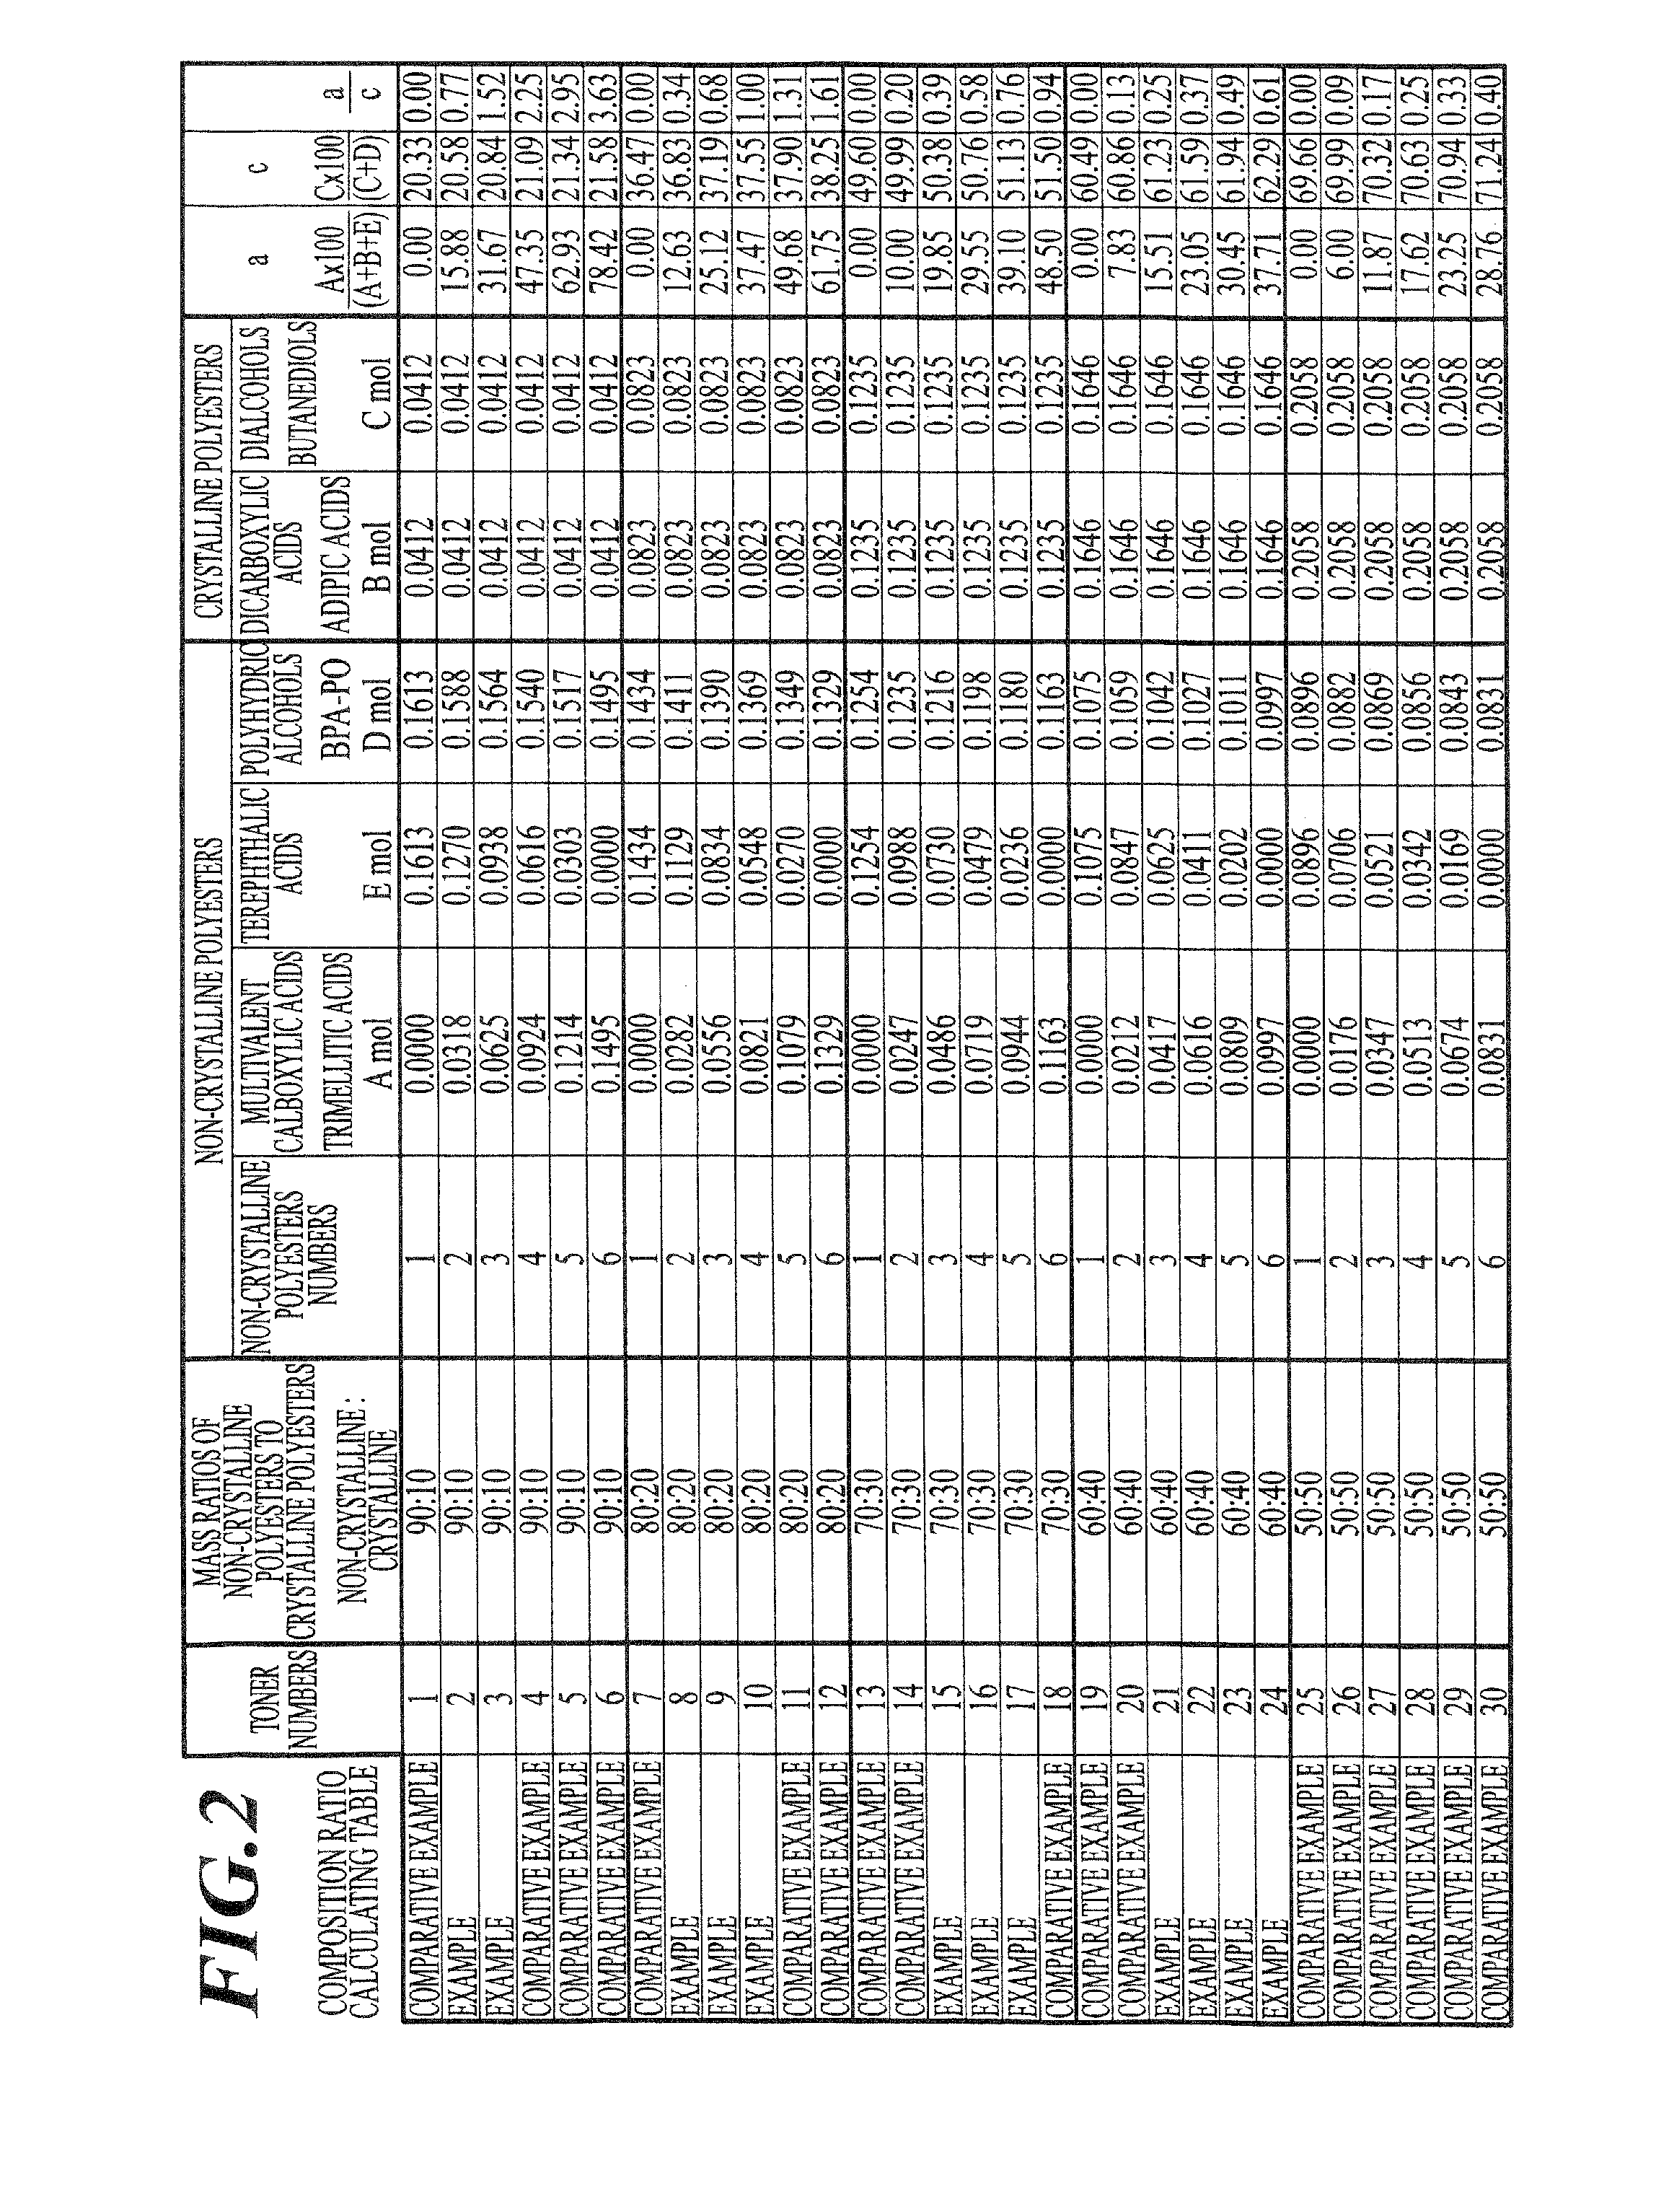 Toner and method for producing toner